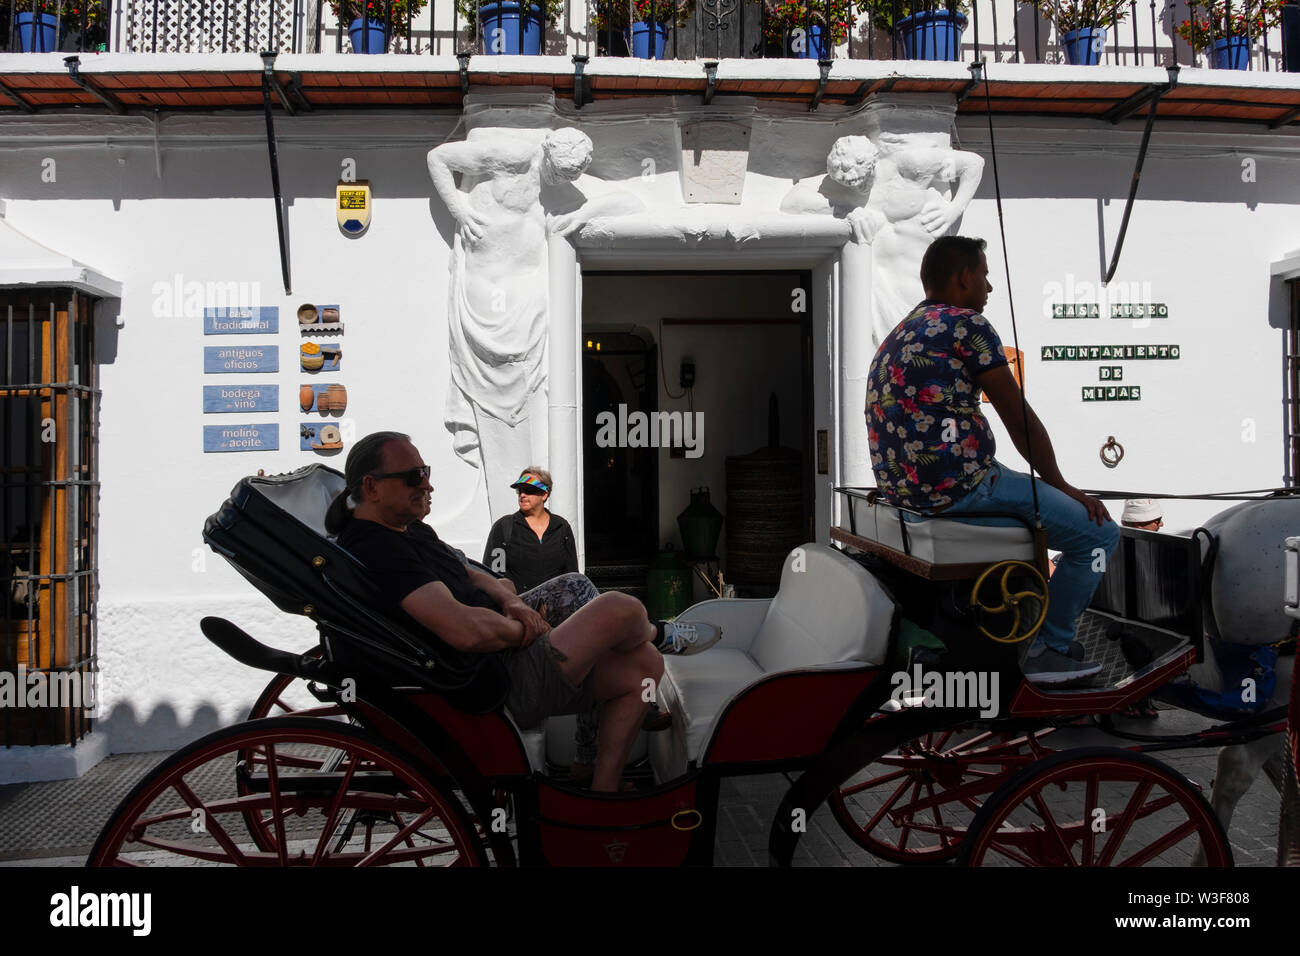 Street life. Casa Museo, white village of Mijas. Malaga province Costa del Sol. Andalusia, Southern Spain Europe Stock Photo